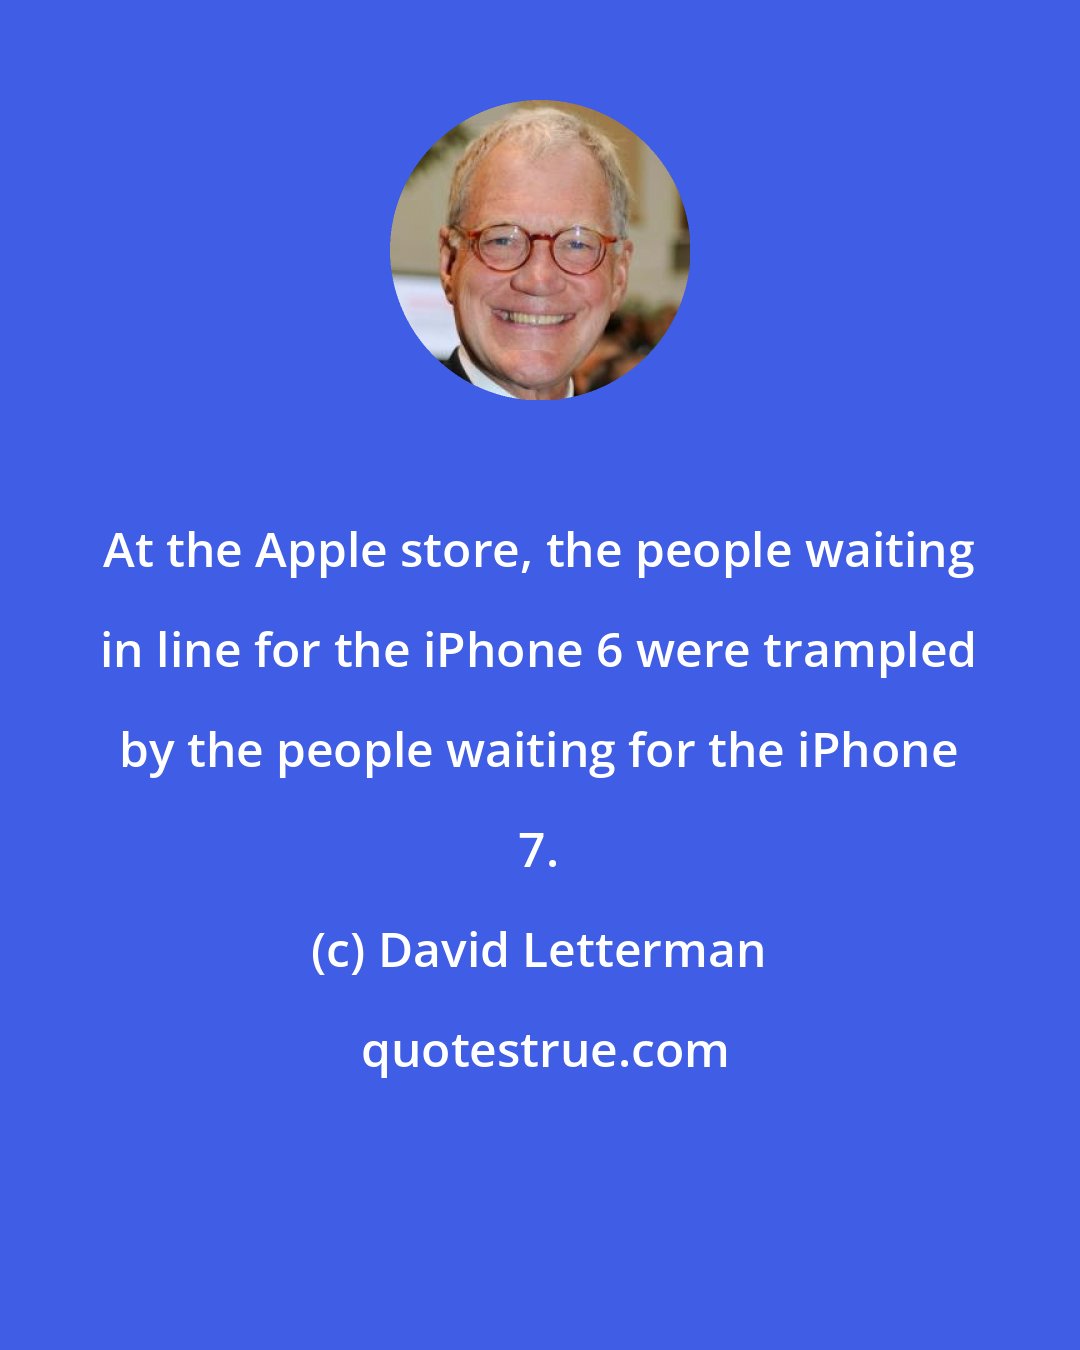 David Letterman: At the Apple store, the people waiting in line for the iPhone 6 were trampled by the people waiting for the iPhone 7.